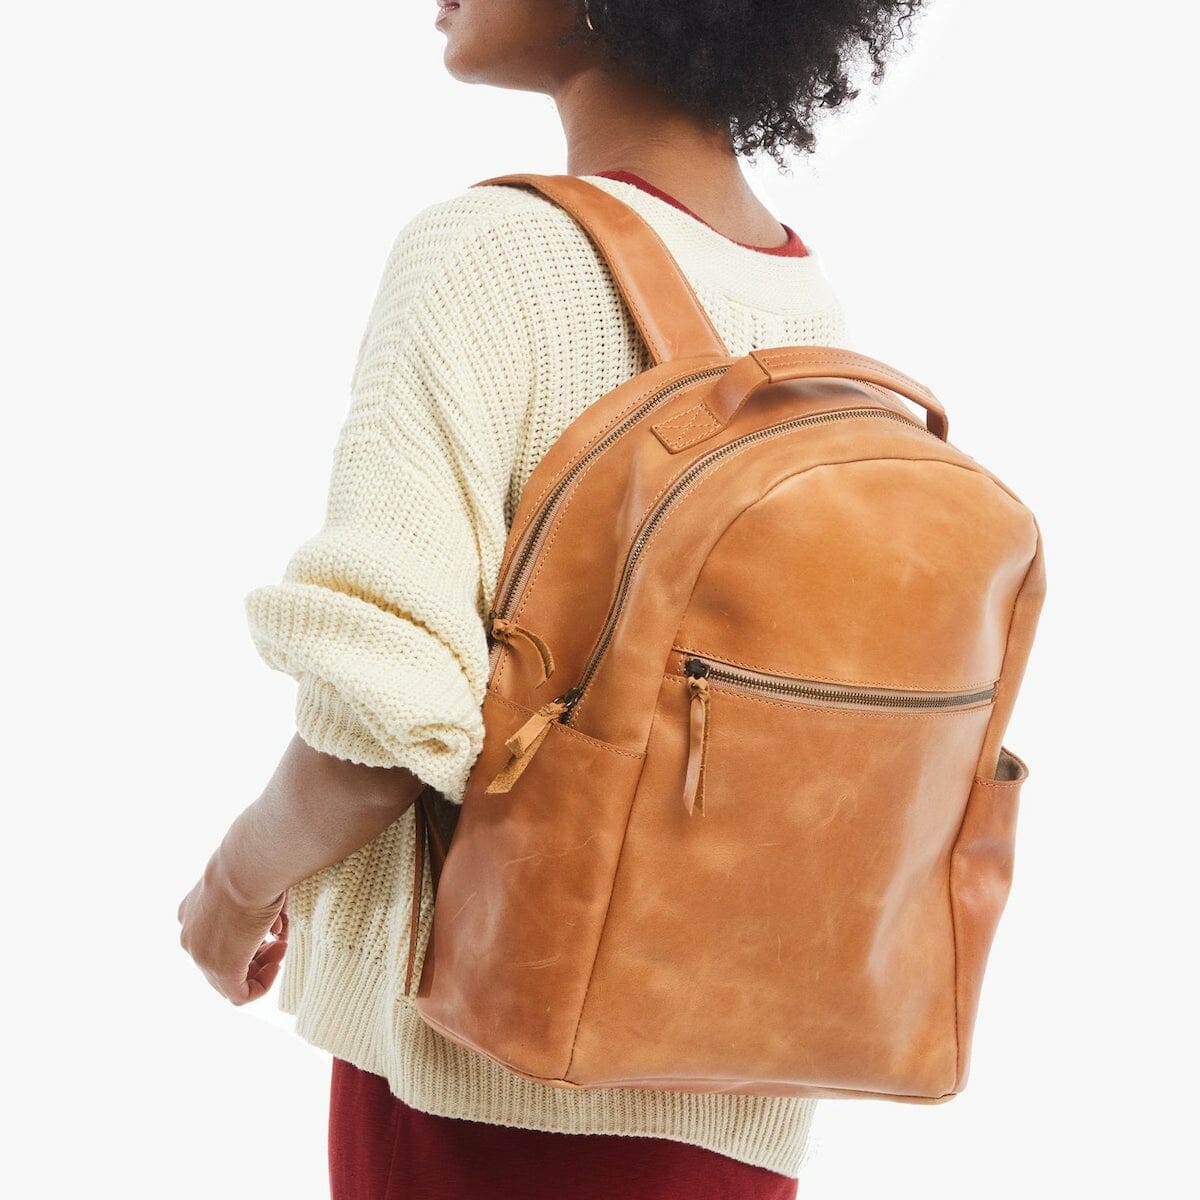 This leather backpack for travel is stylishly modeled.